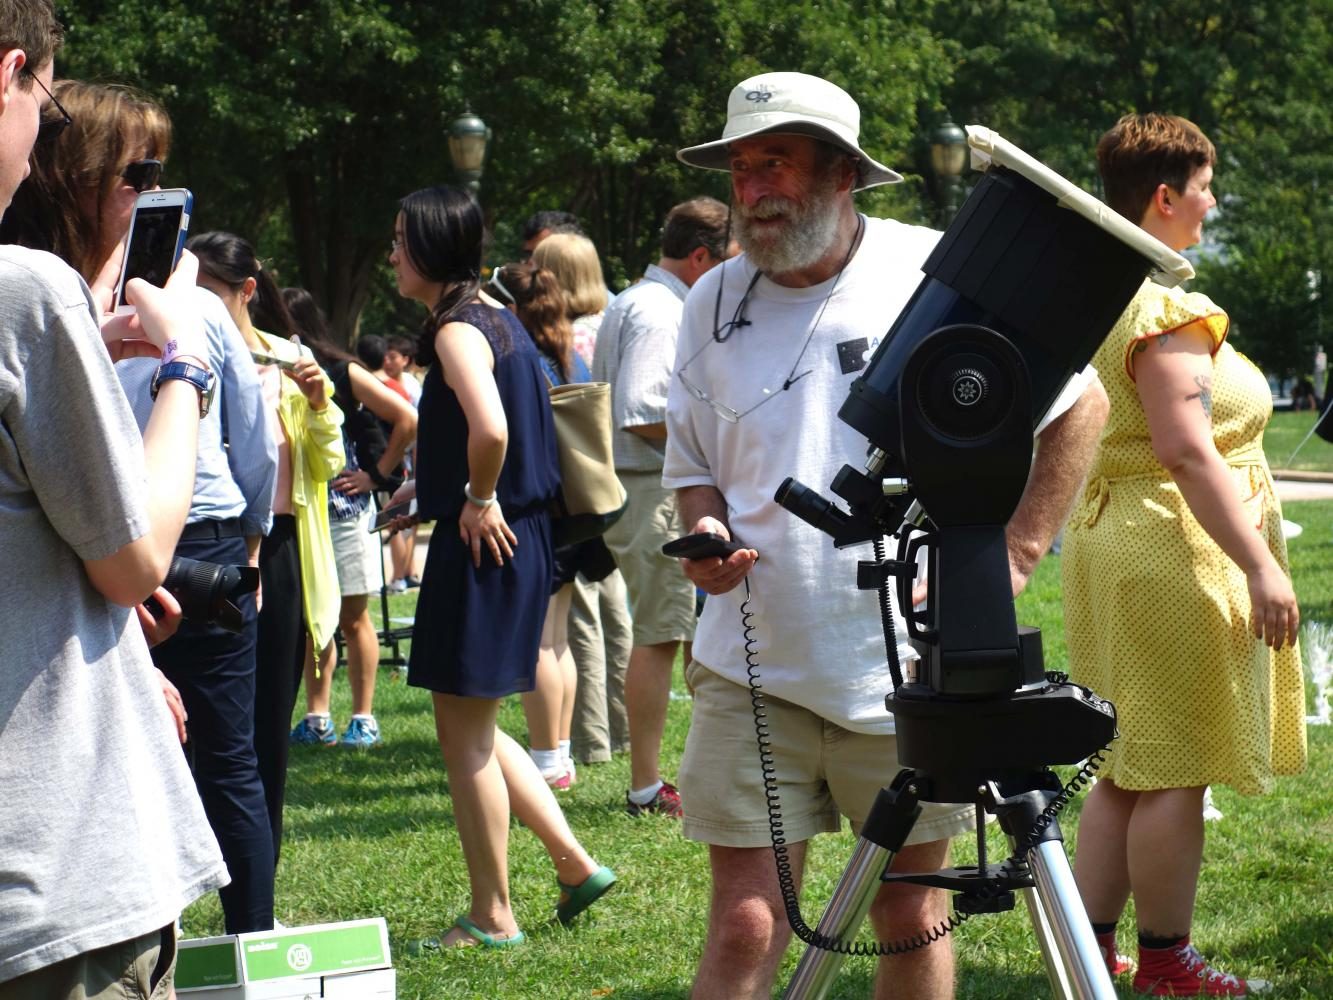 Many viewed the eclipse from the Warner and Swasey Observatory or the Kent Hale Smith Oval.